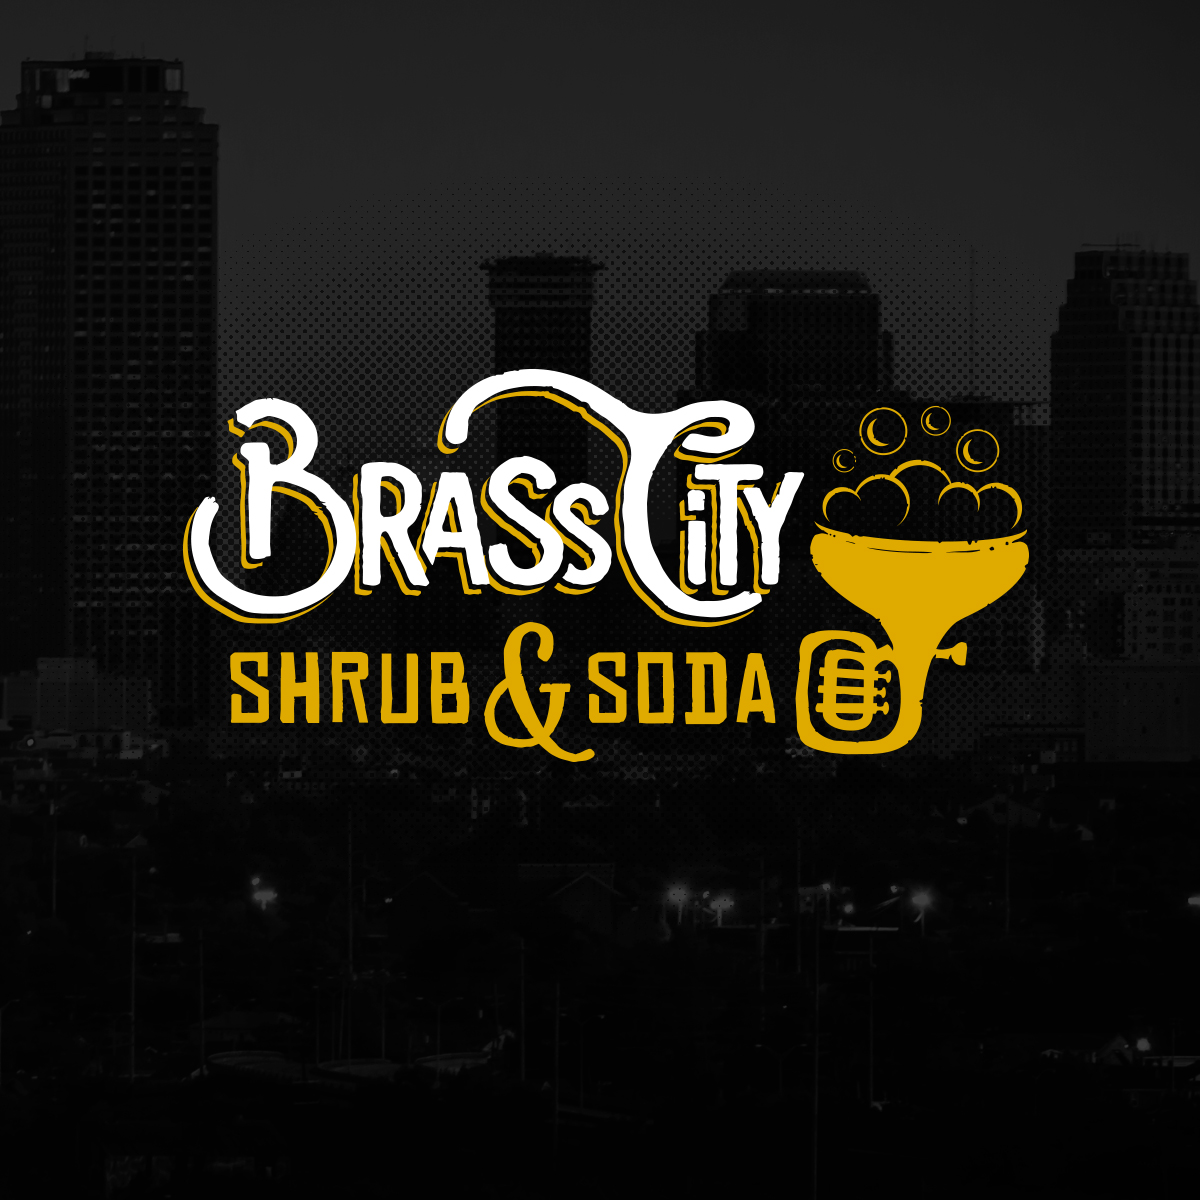 A horn and soda logo design for a company in New Orleans LA